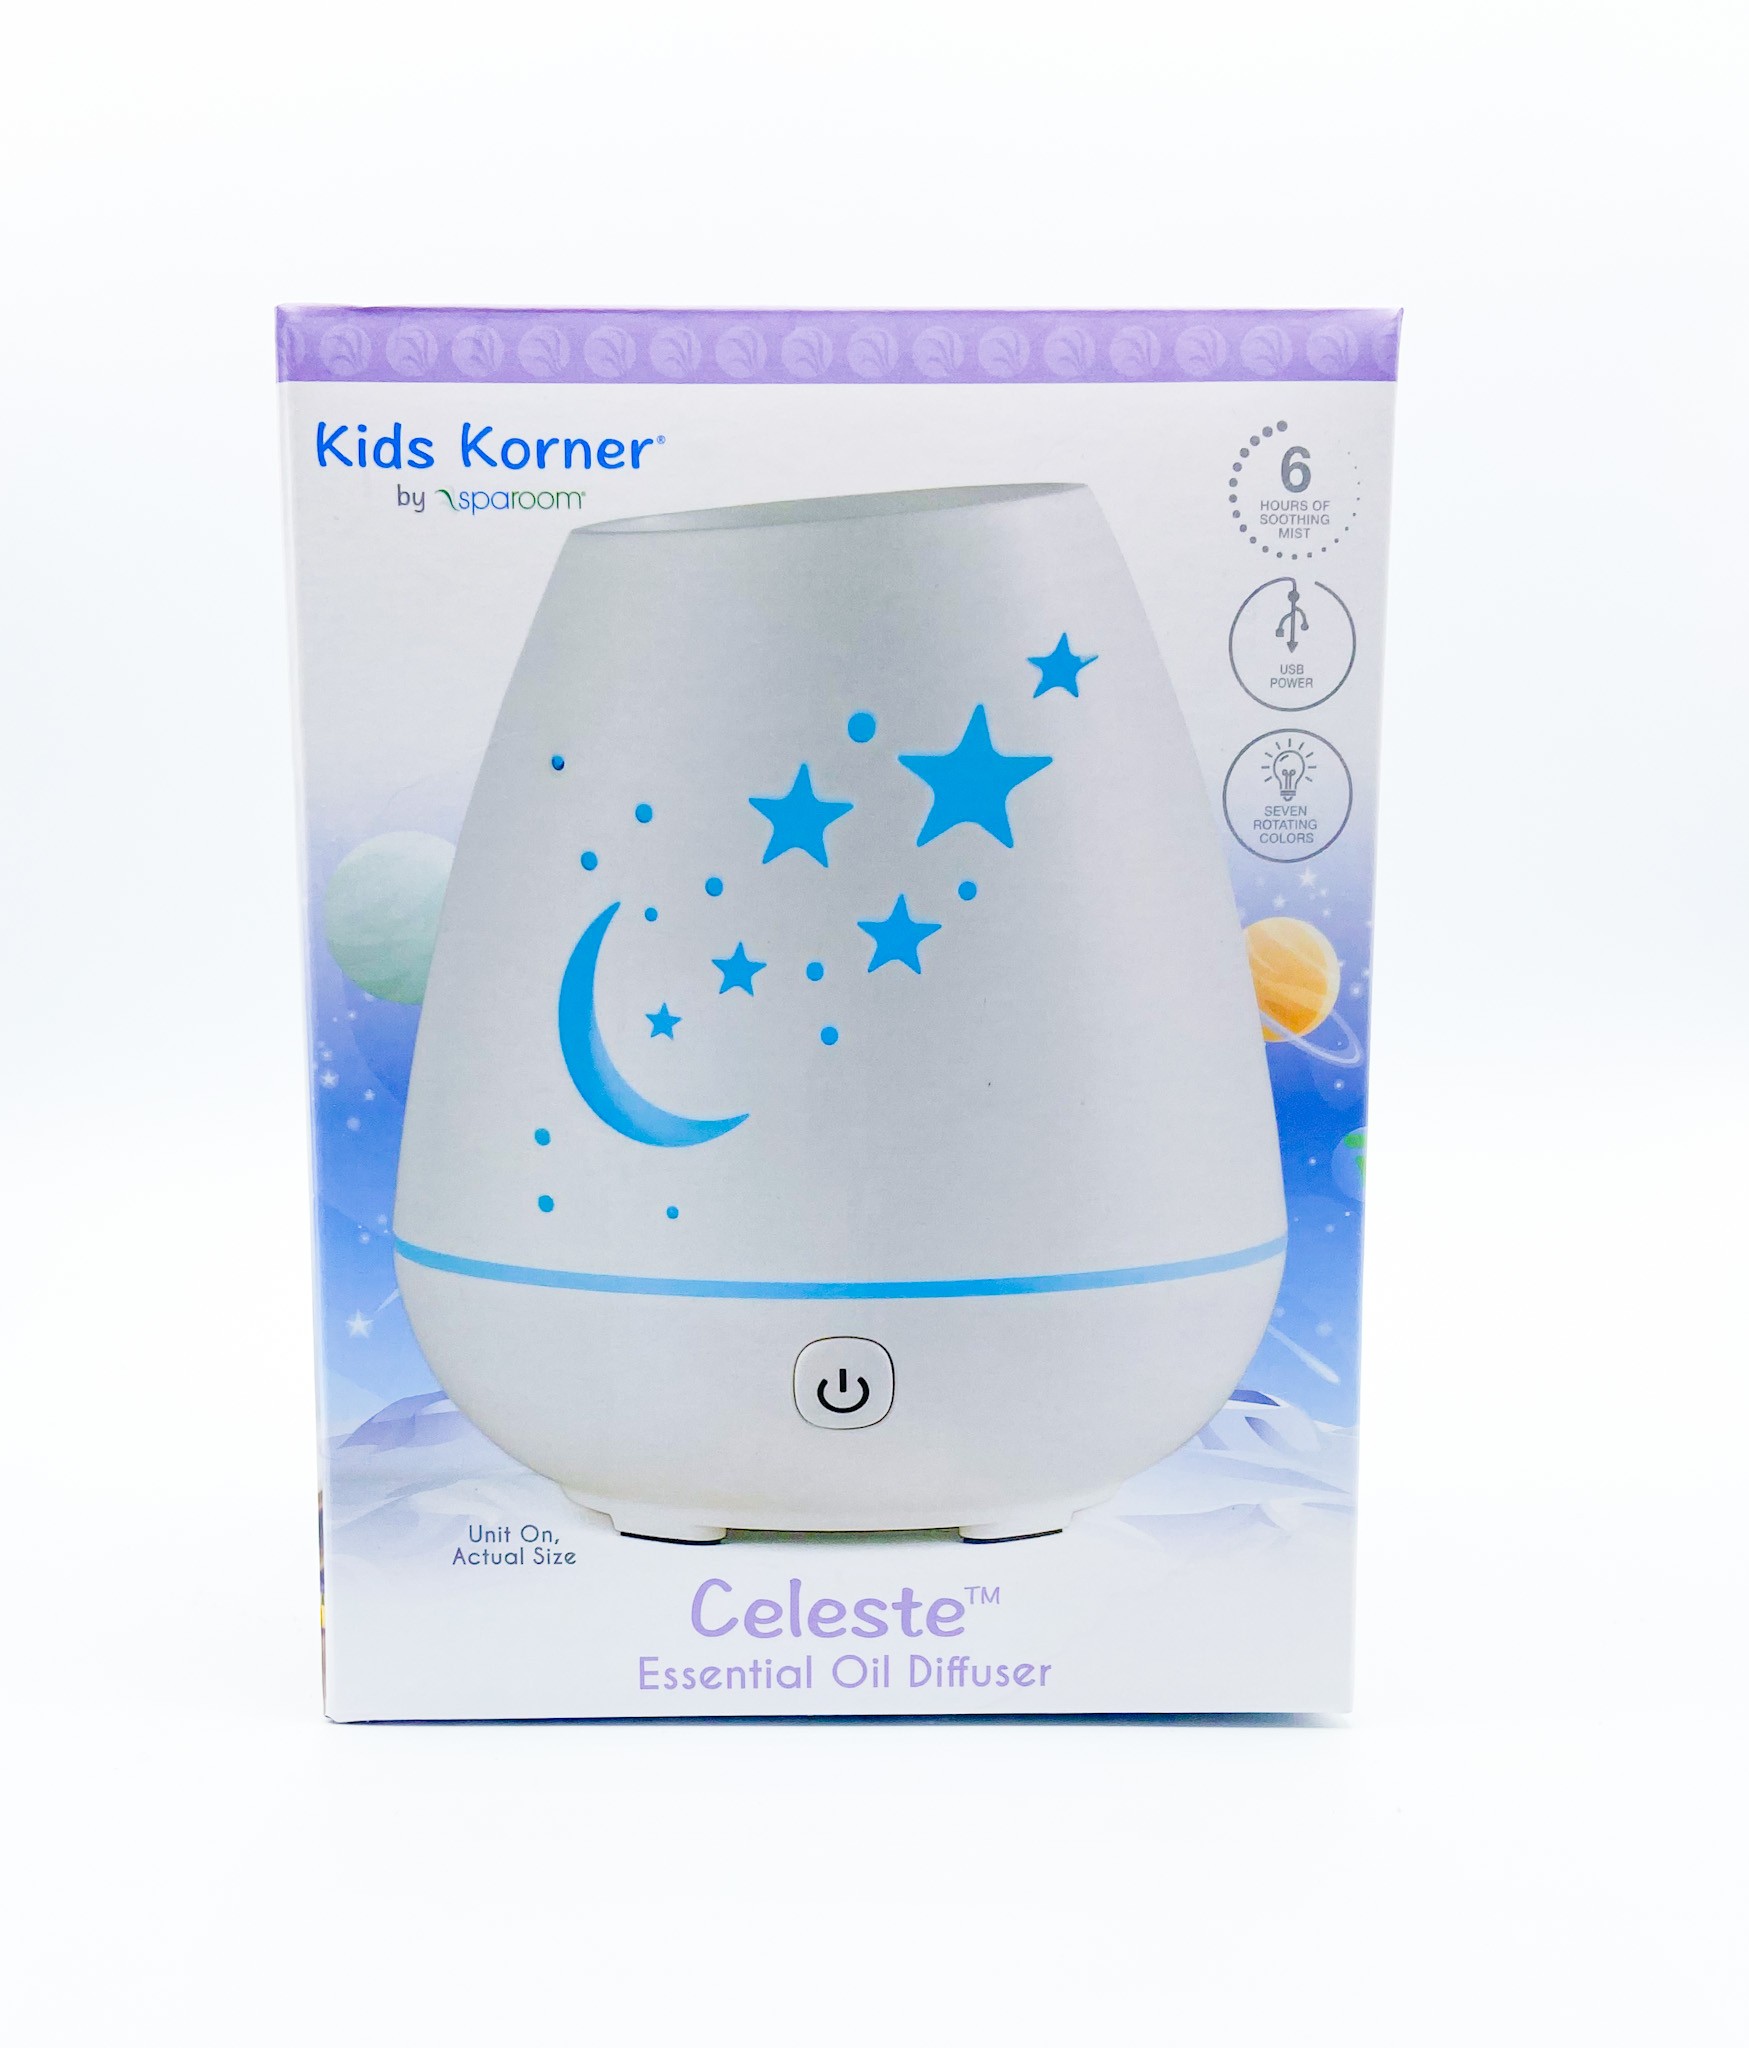 Aroma Diffuser Oil, St.Kleen Collection – Saint by St.Clair